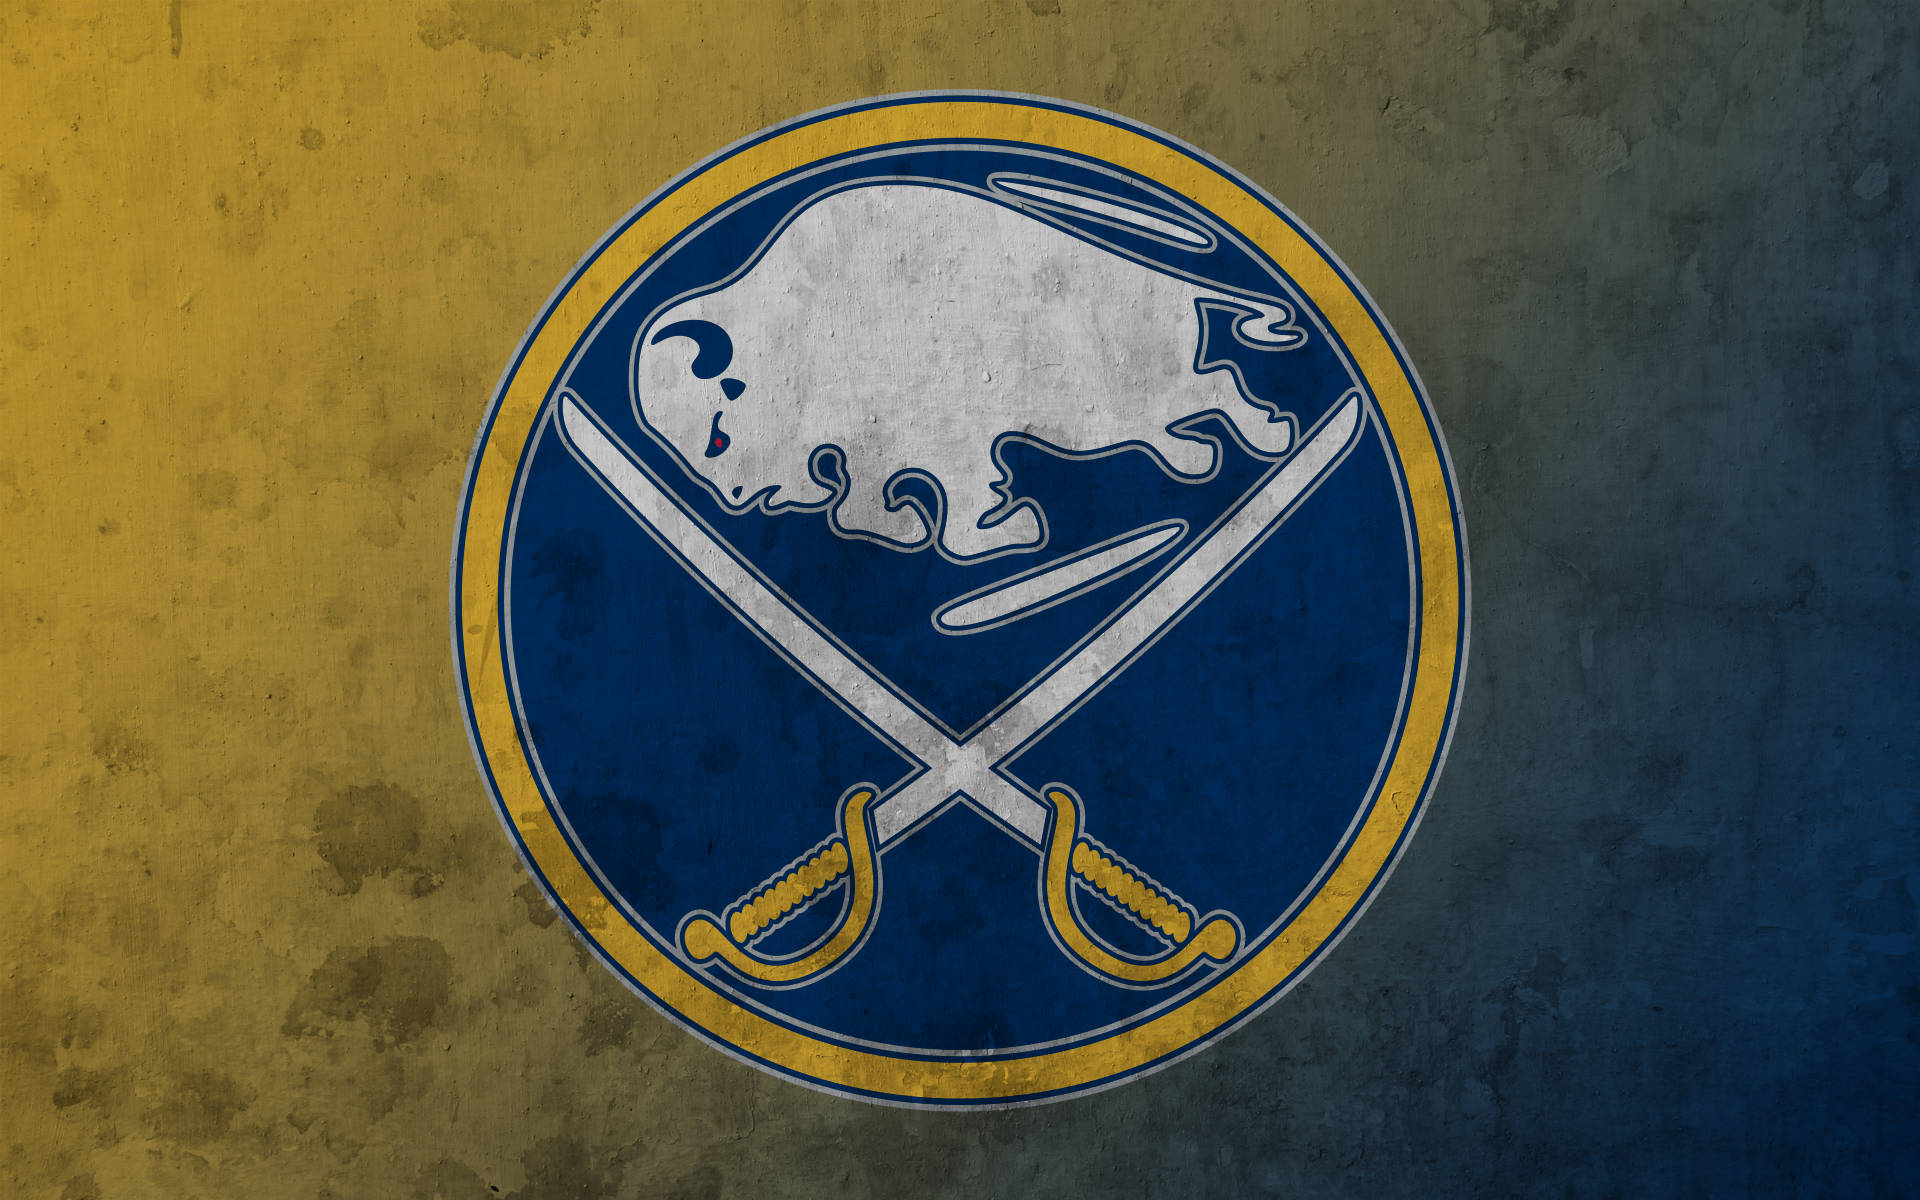 Buffalo Sabres Displaying Strength And Spirit In Rugged Blue And Yellow Background